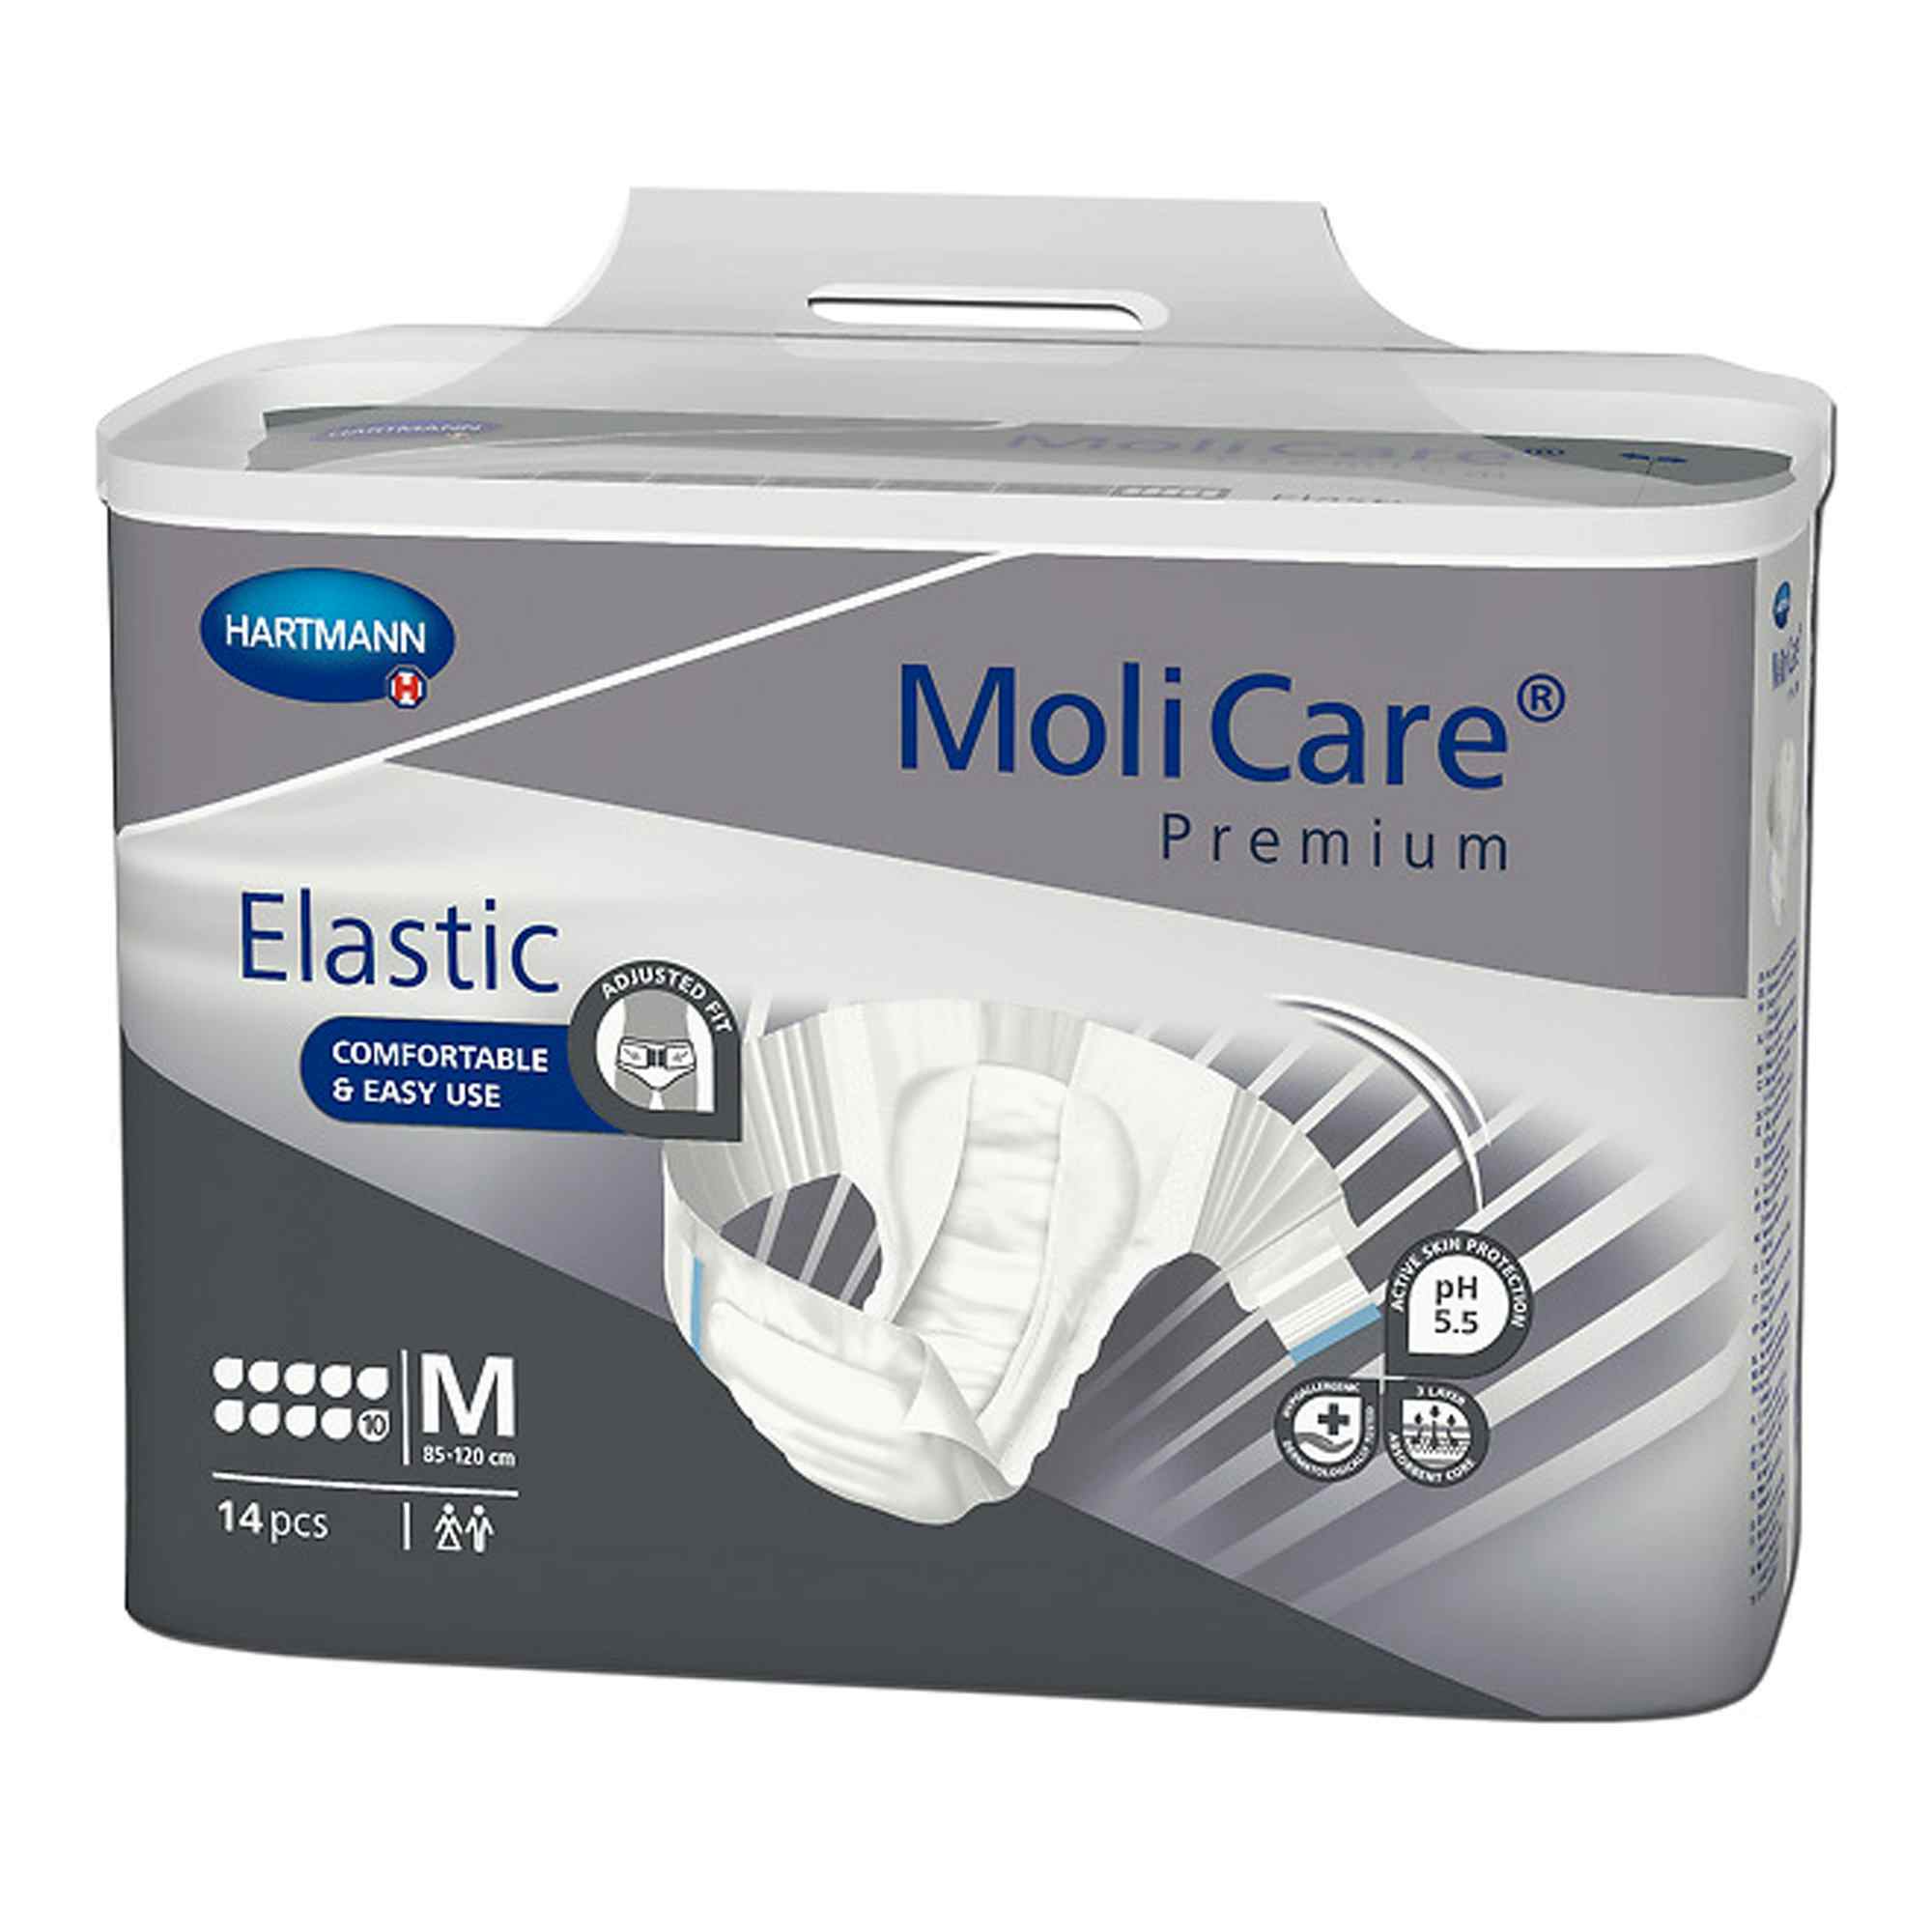 MoliCare Premium 10D Disposable Brief Adult Diapers with Tabs, Heavy Absorbency, 165672, Medium (33-47") - Pack of 14